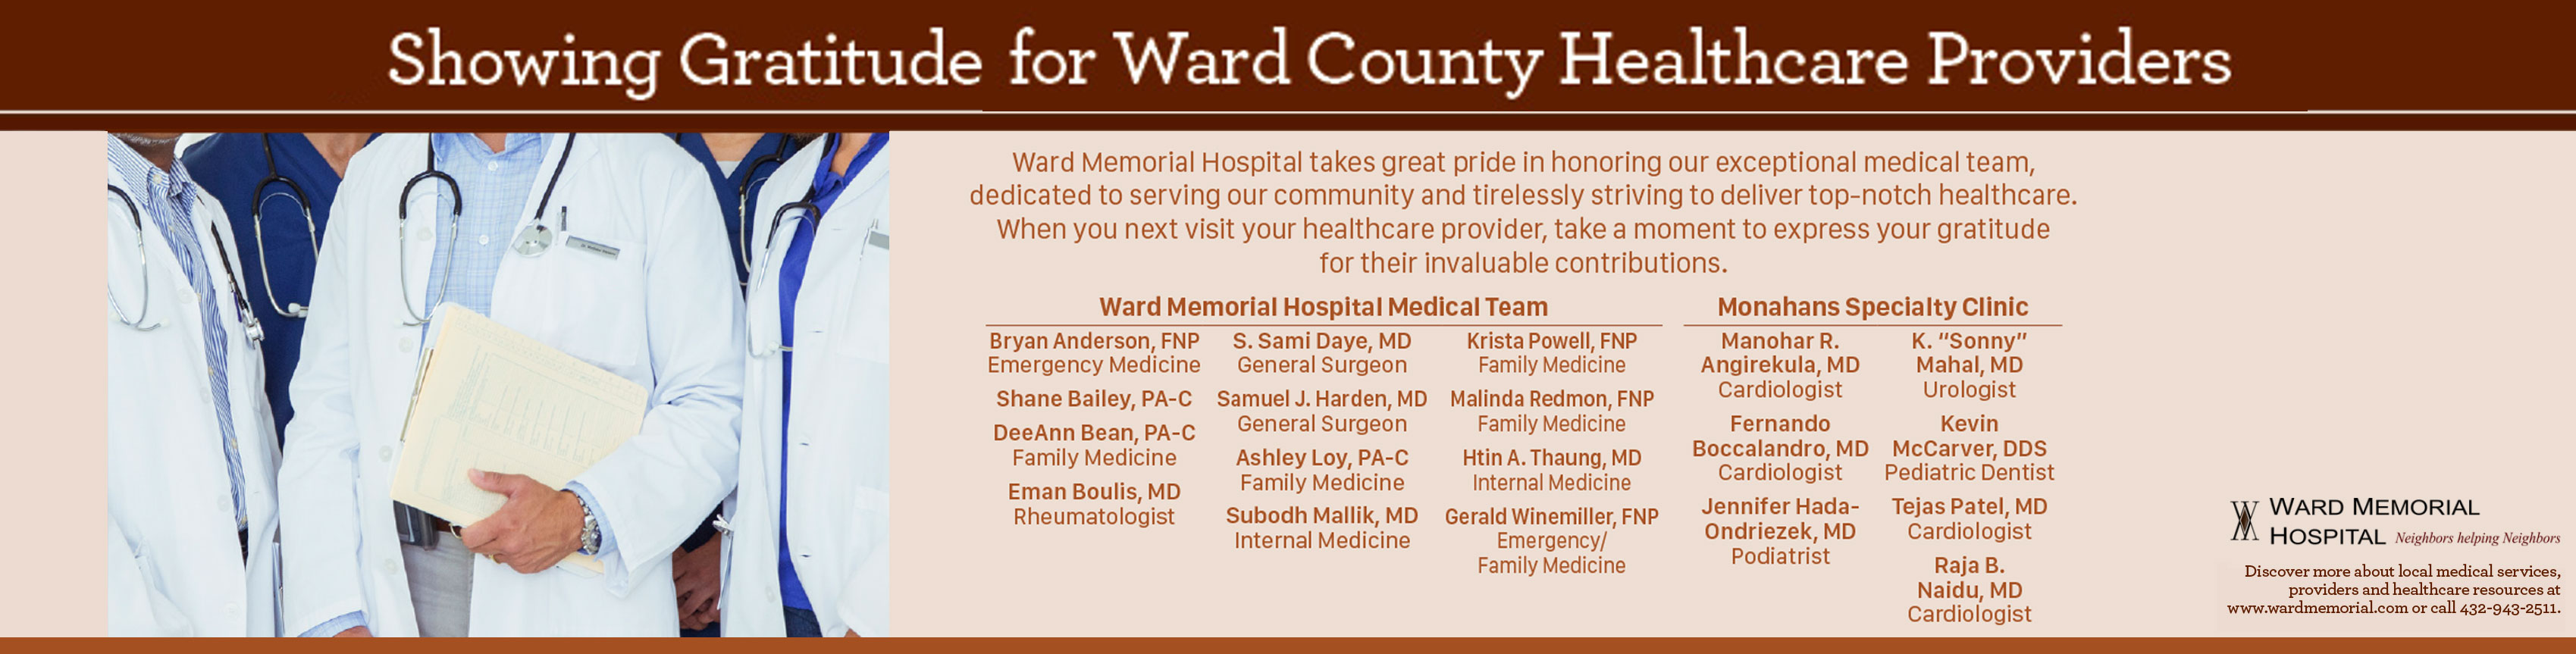 Showing gratitude for Ward County Health Providers 

We depend on the providers of our community now more than ever. In this year of great need for healthcare, join us in showing appreciation for their dedication to caring for our health and protecting our community.

Ward Memorial Hospital Medical Team

* Shane Bailey, PA-C
* DeeAnn Bean, PA-C (Family Medicine)
Eman Boulis,MD (Rheumatologist)
* Amanda Darling, FNP (Family Medicine)
* S. Sami Daye, MD (General Surgeon)
* Samuel J. Harden MD (General Surgeon)
* Shonna Harris, FNP (Family Medicine(
* Subodh Mallik, MD (Internal Medicine)
* Krista Powell, FNP (Family Medicine)
* Malinda Redmon, FNP (Family Medicine)
* Gtin A. Thaung, MD (Internal Medicine)
* Sudhir Amaram (MD Cardiologist)
* Manohar R. Angirekula, MD (Cardiologist)
* Fermando Boccalandra, MD (Cardiologist)
* Jennifer Hada-Ondriezek, MD (podiatrist) 
* K. "Sonny" Mahal, MD (Urologist)
* Kevin McCarver, DDS (Pediatric Dentist)
* Raja B. Naidu, MD (Cardiologist)